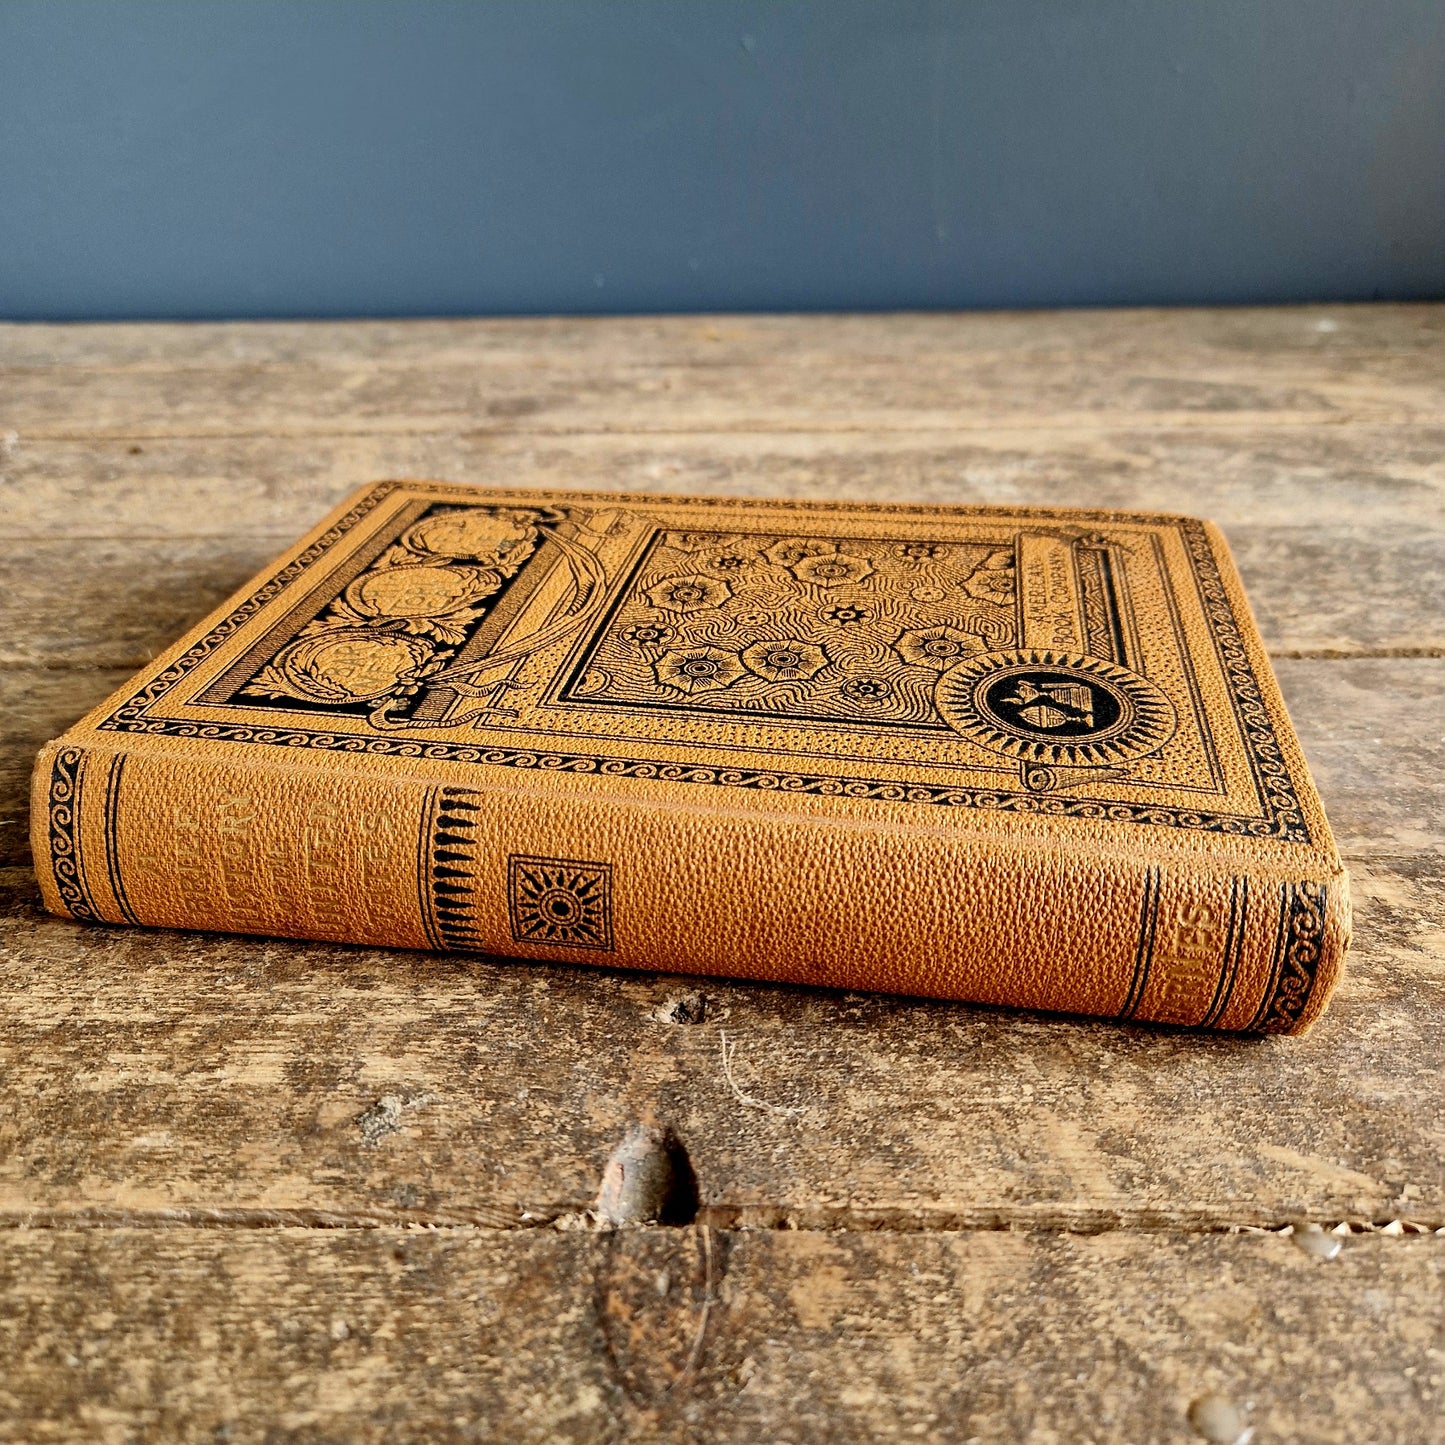 Antique American book. A brief history of the United States.